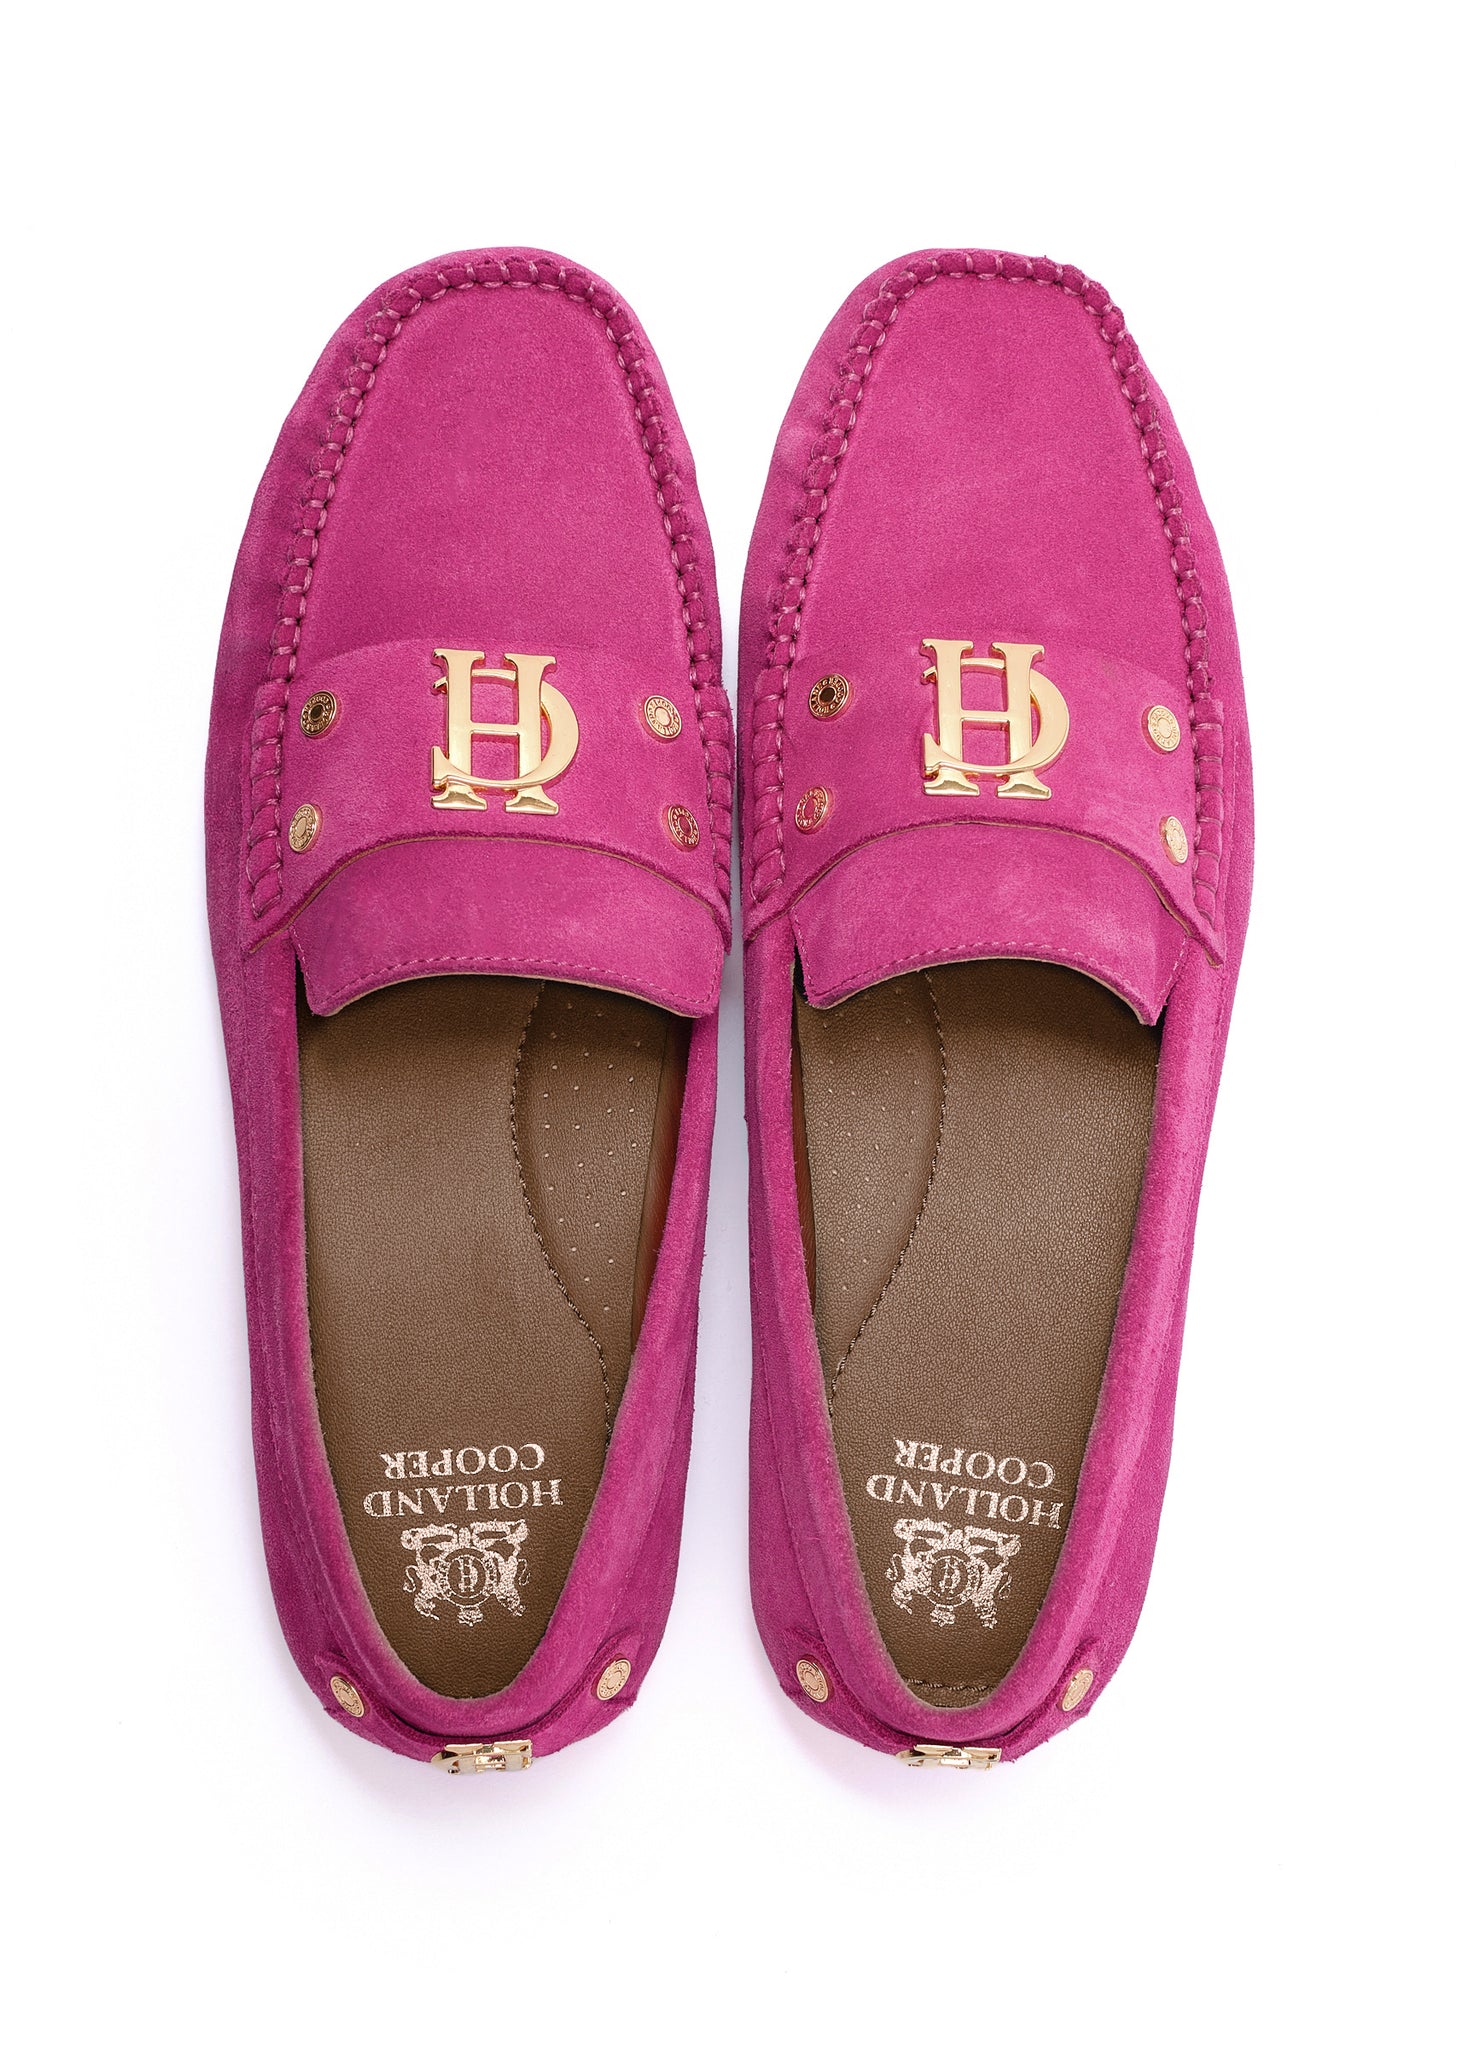 bright pink suede loafers with a leather sole and top stitching details and gold hardware with gold foil branding on the inner sole